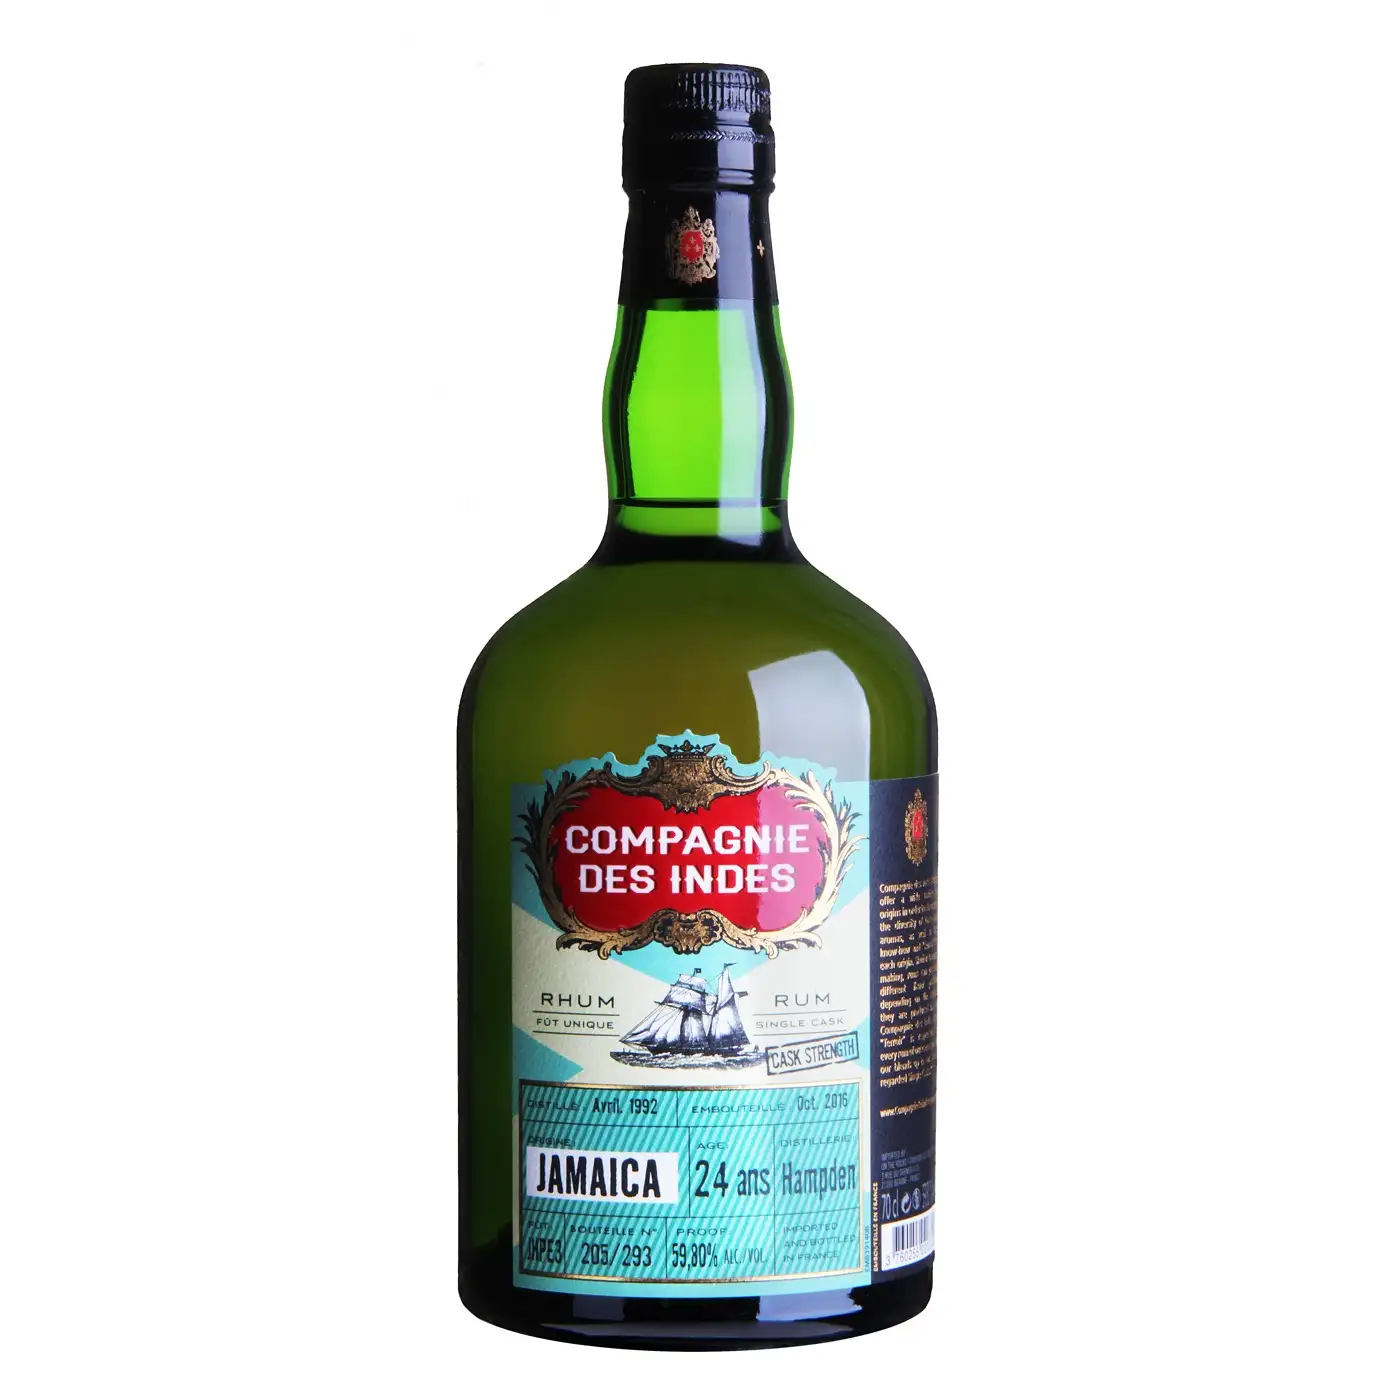 Image of the front of the bottle of the rum Jamaica HLCF